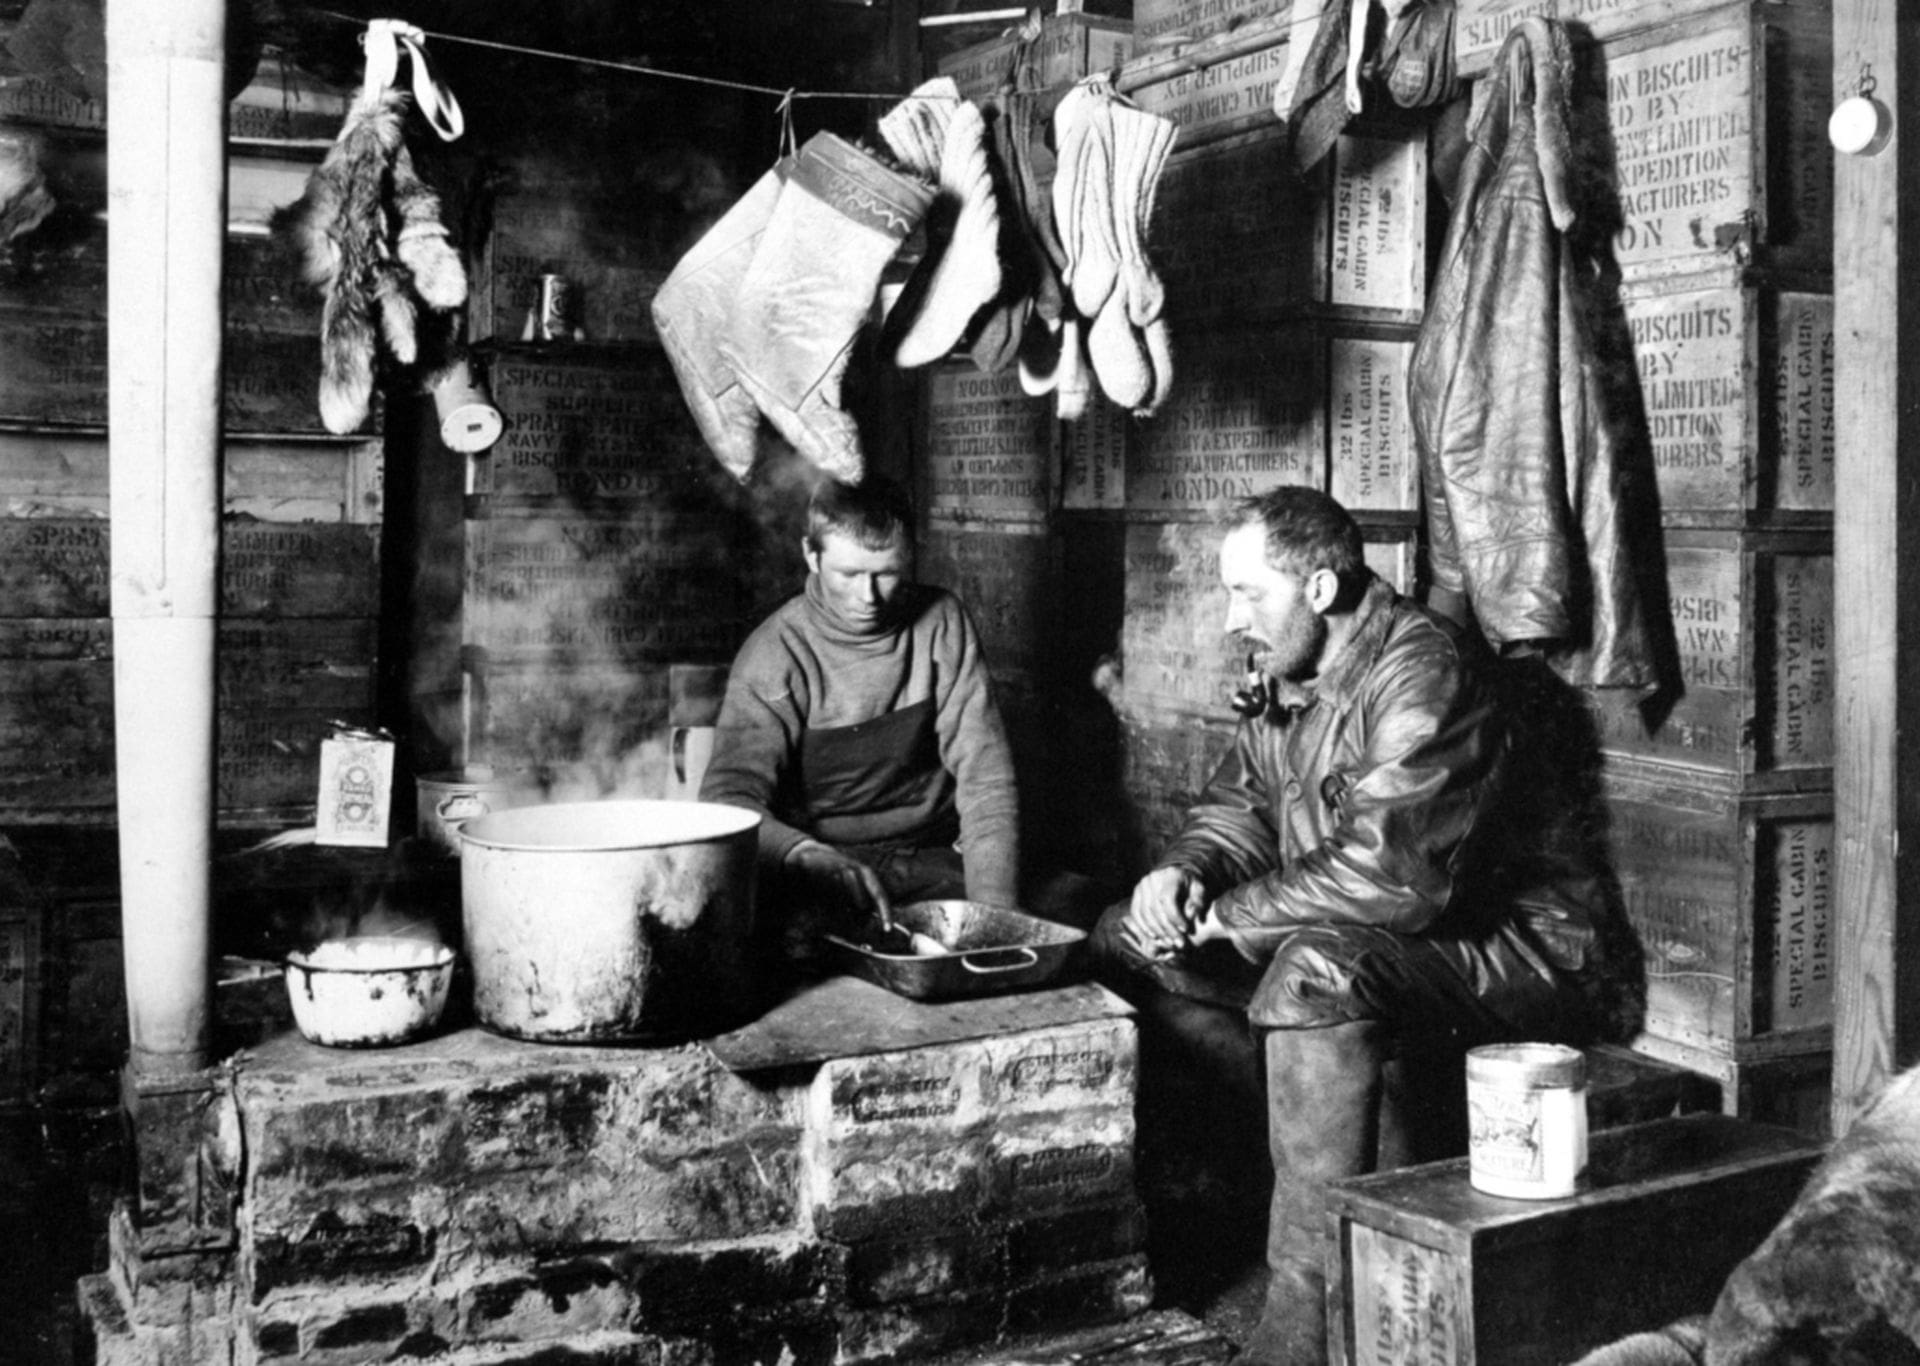 Dimitri and Meares (members of Scott's 1910-13 Expedition) around the blubber stove at Hut Point, 3 November 1911